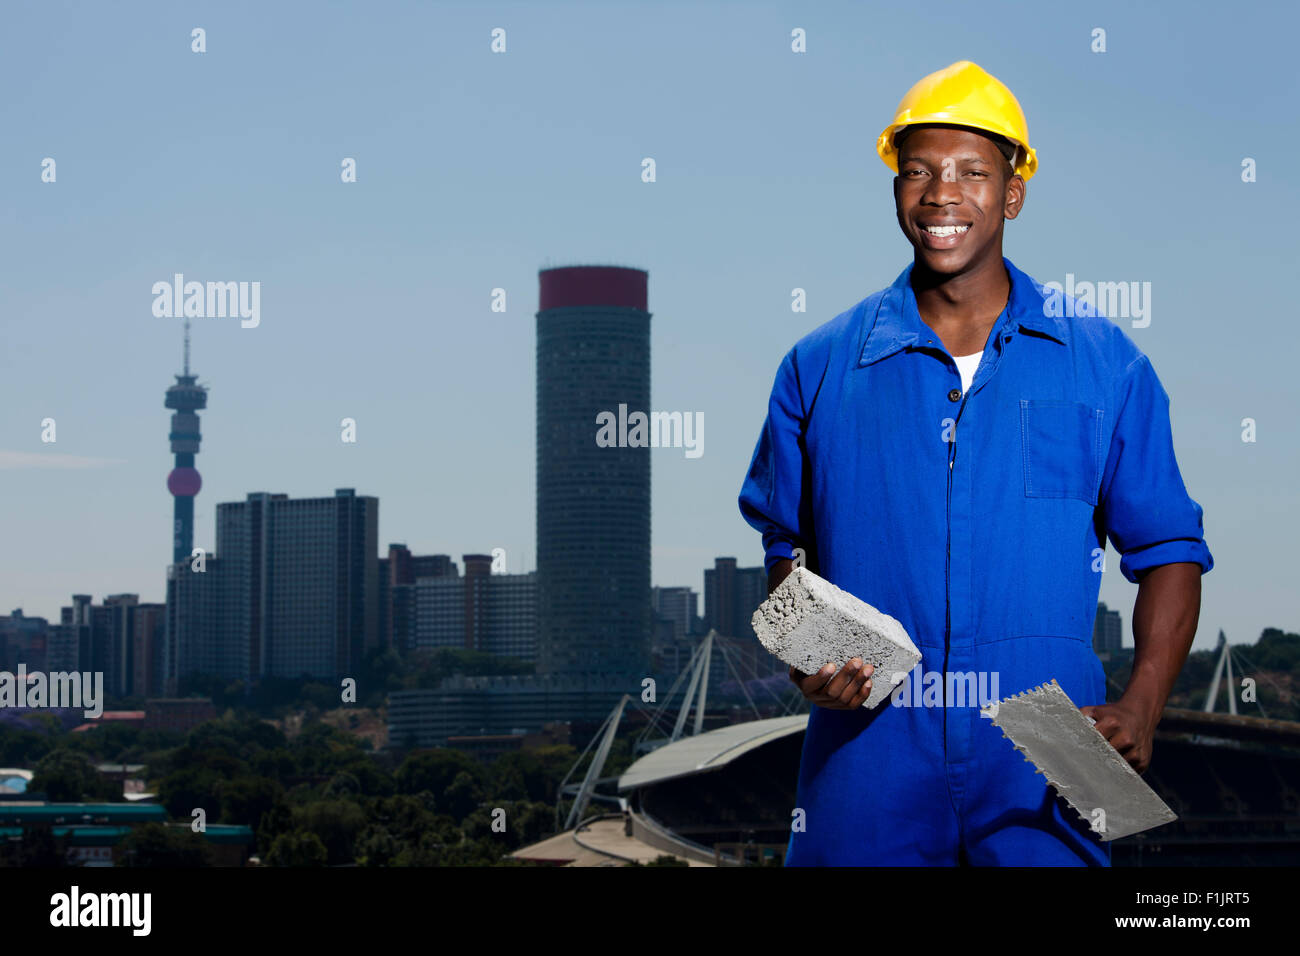 Construction worker laying bricks with cityscape in background Stock Photo